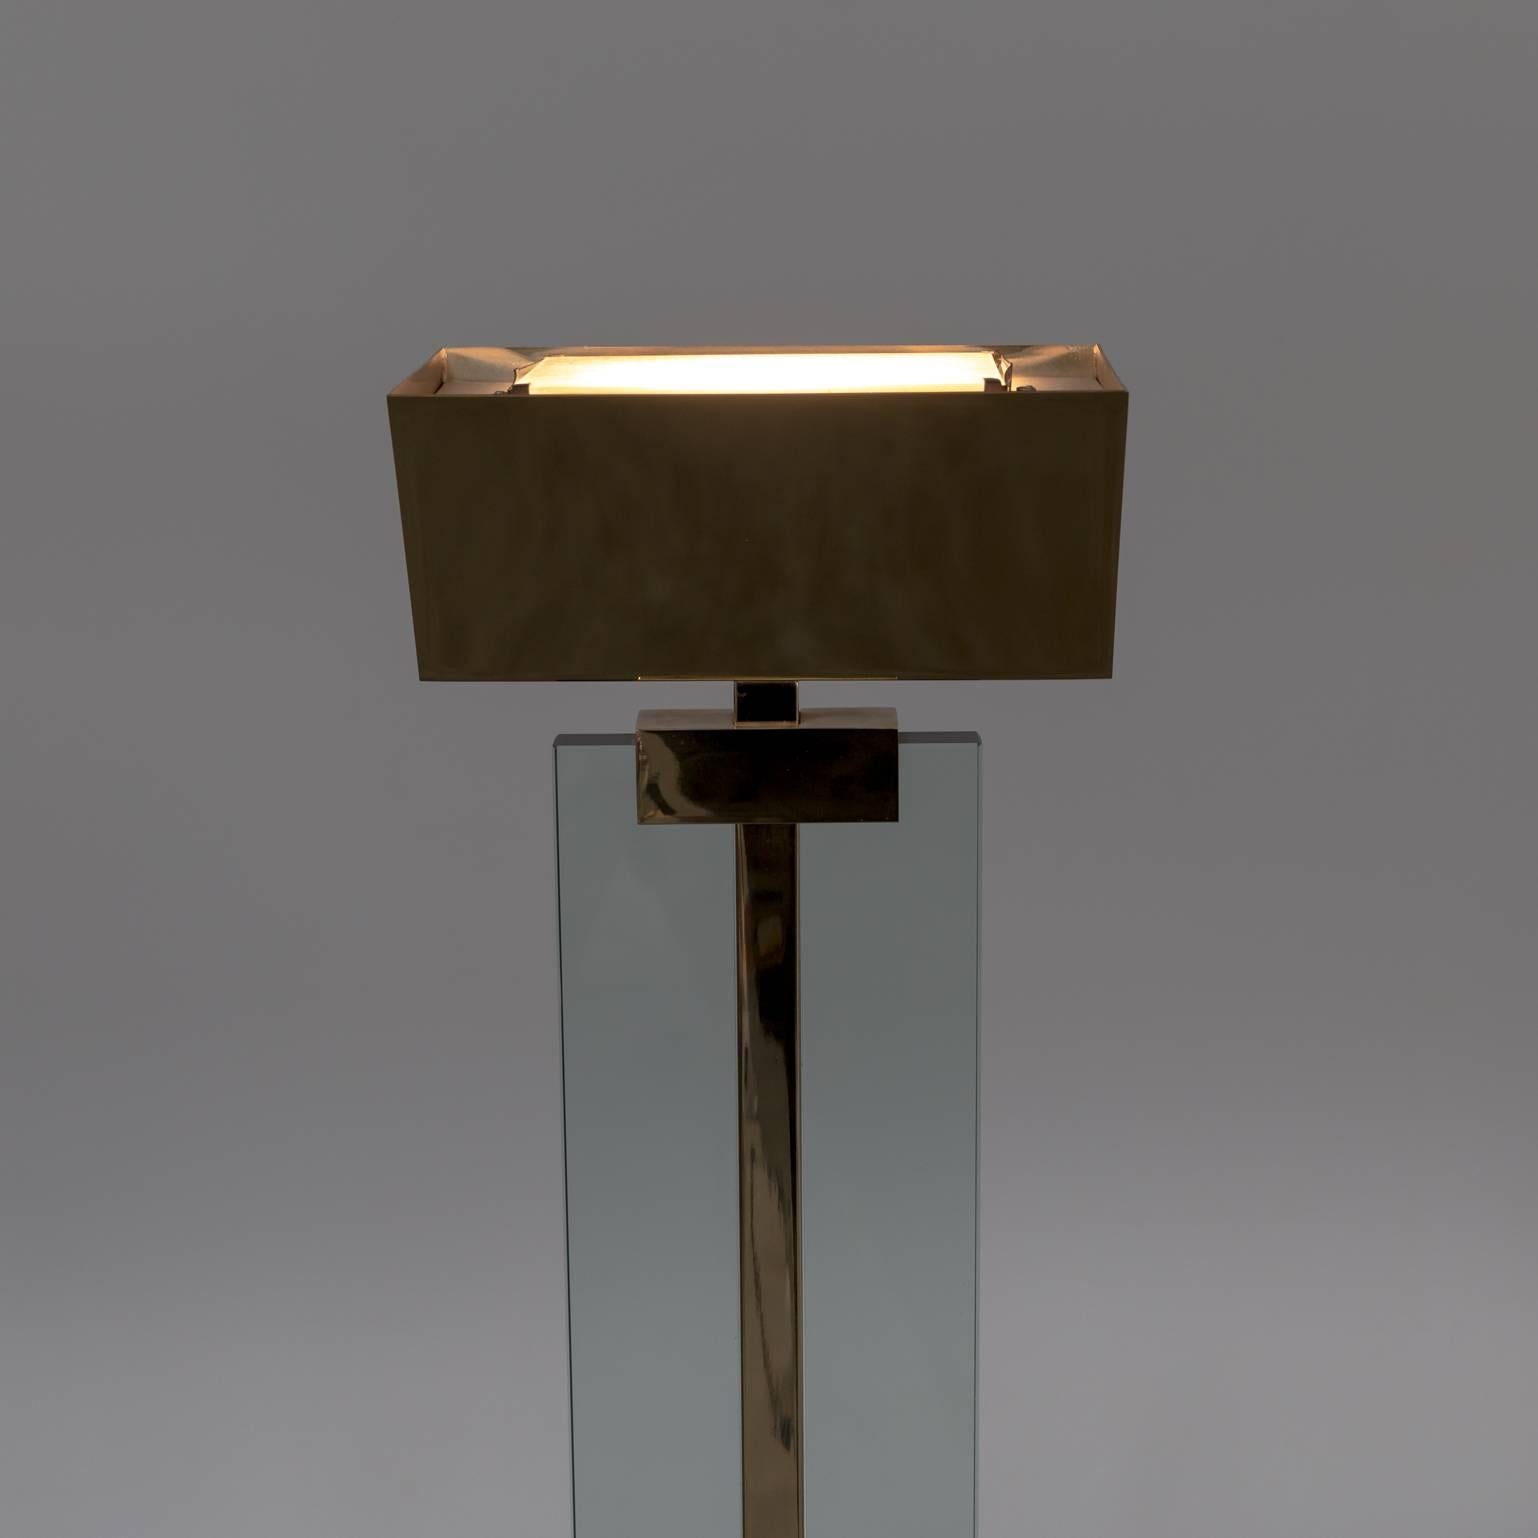 Italian 1970s Mauro Martini Glass and Brass Floor Lamp for Fratelli Martini For Sale